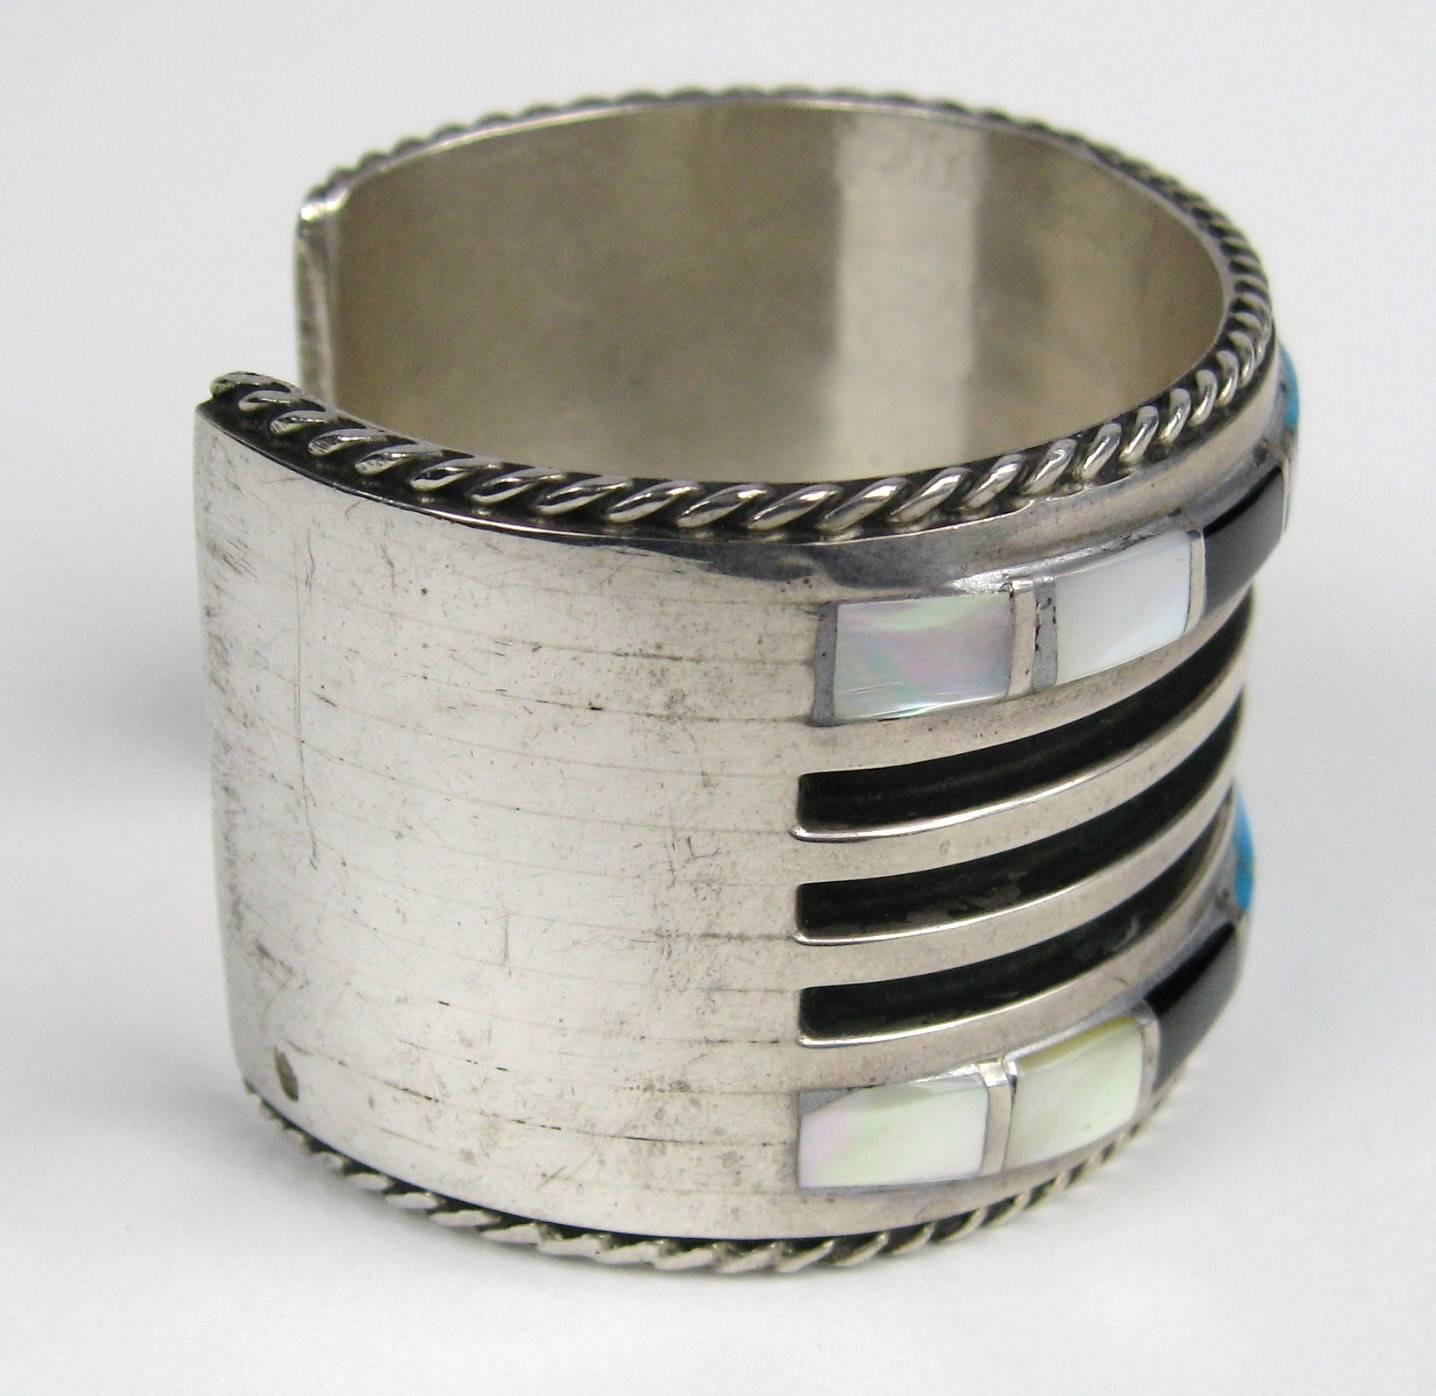 Heavy Sterling Silver Bracelet Nice statement piece Measuring 1.50 wide Opening is 1.20  Will fit a 6.5  to 7.5  wrist It does have some give to it. This is out of a massive collection of Hopi, Zuni, Navajo, Southwestern and sterling silver jewelry